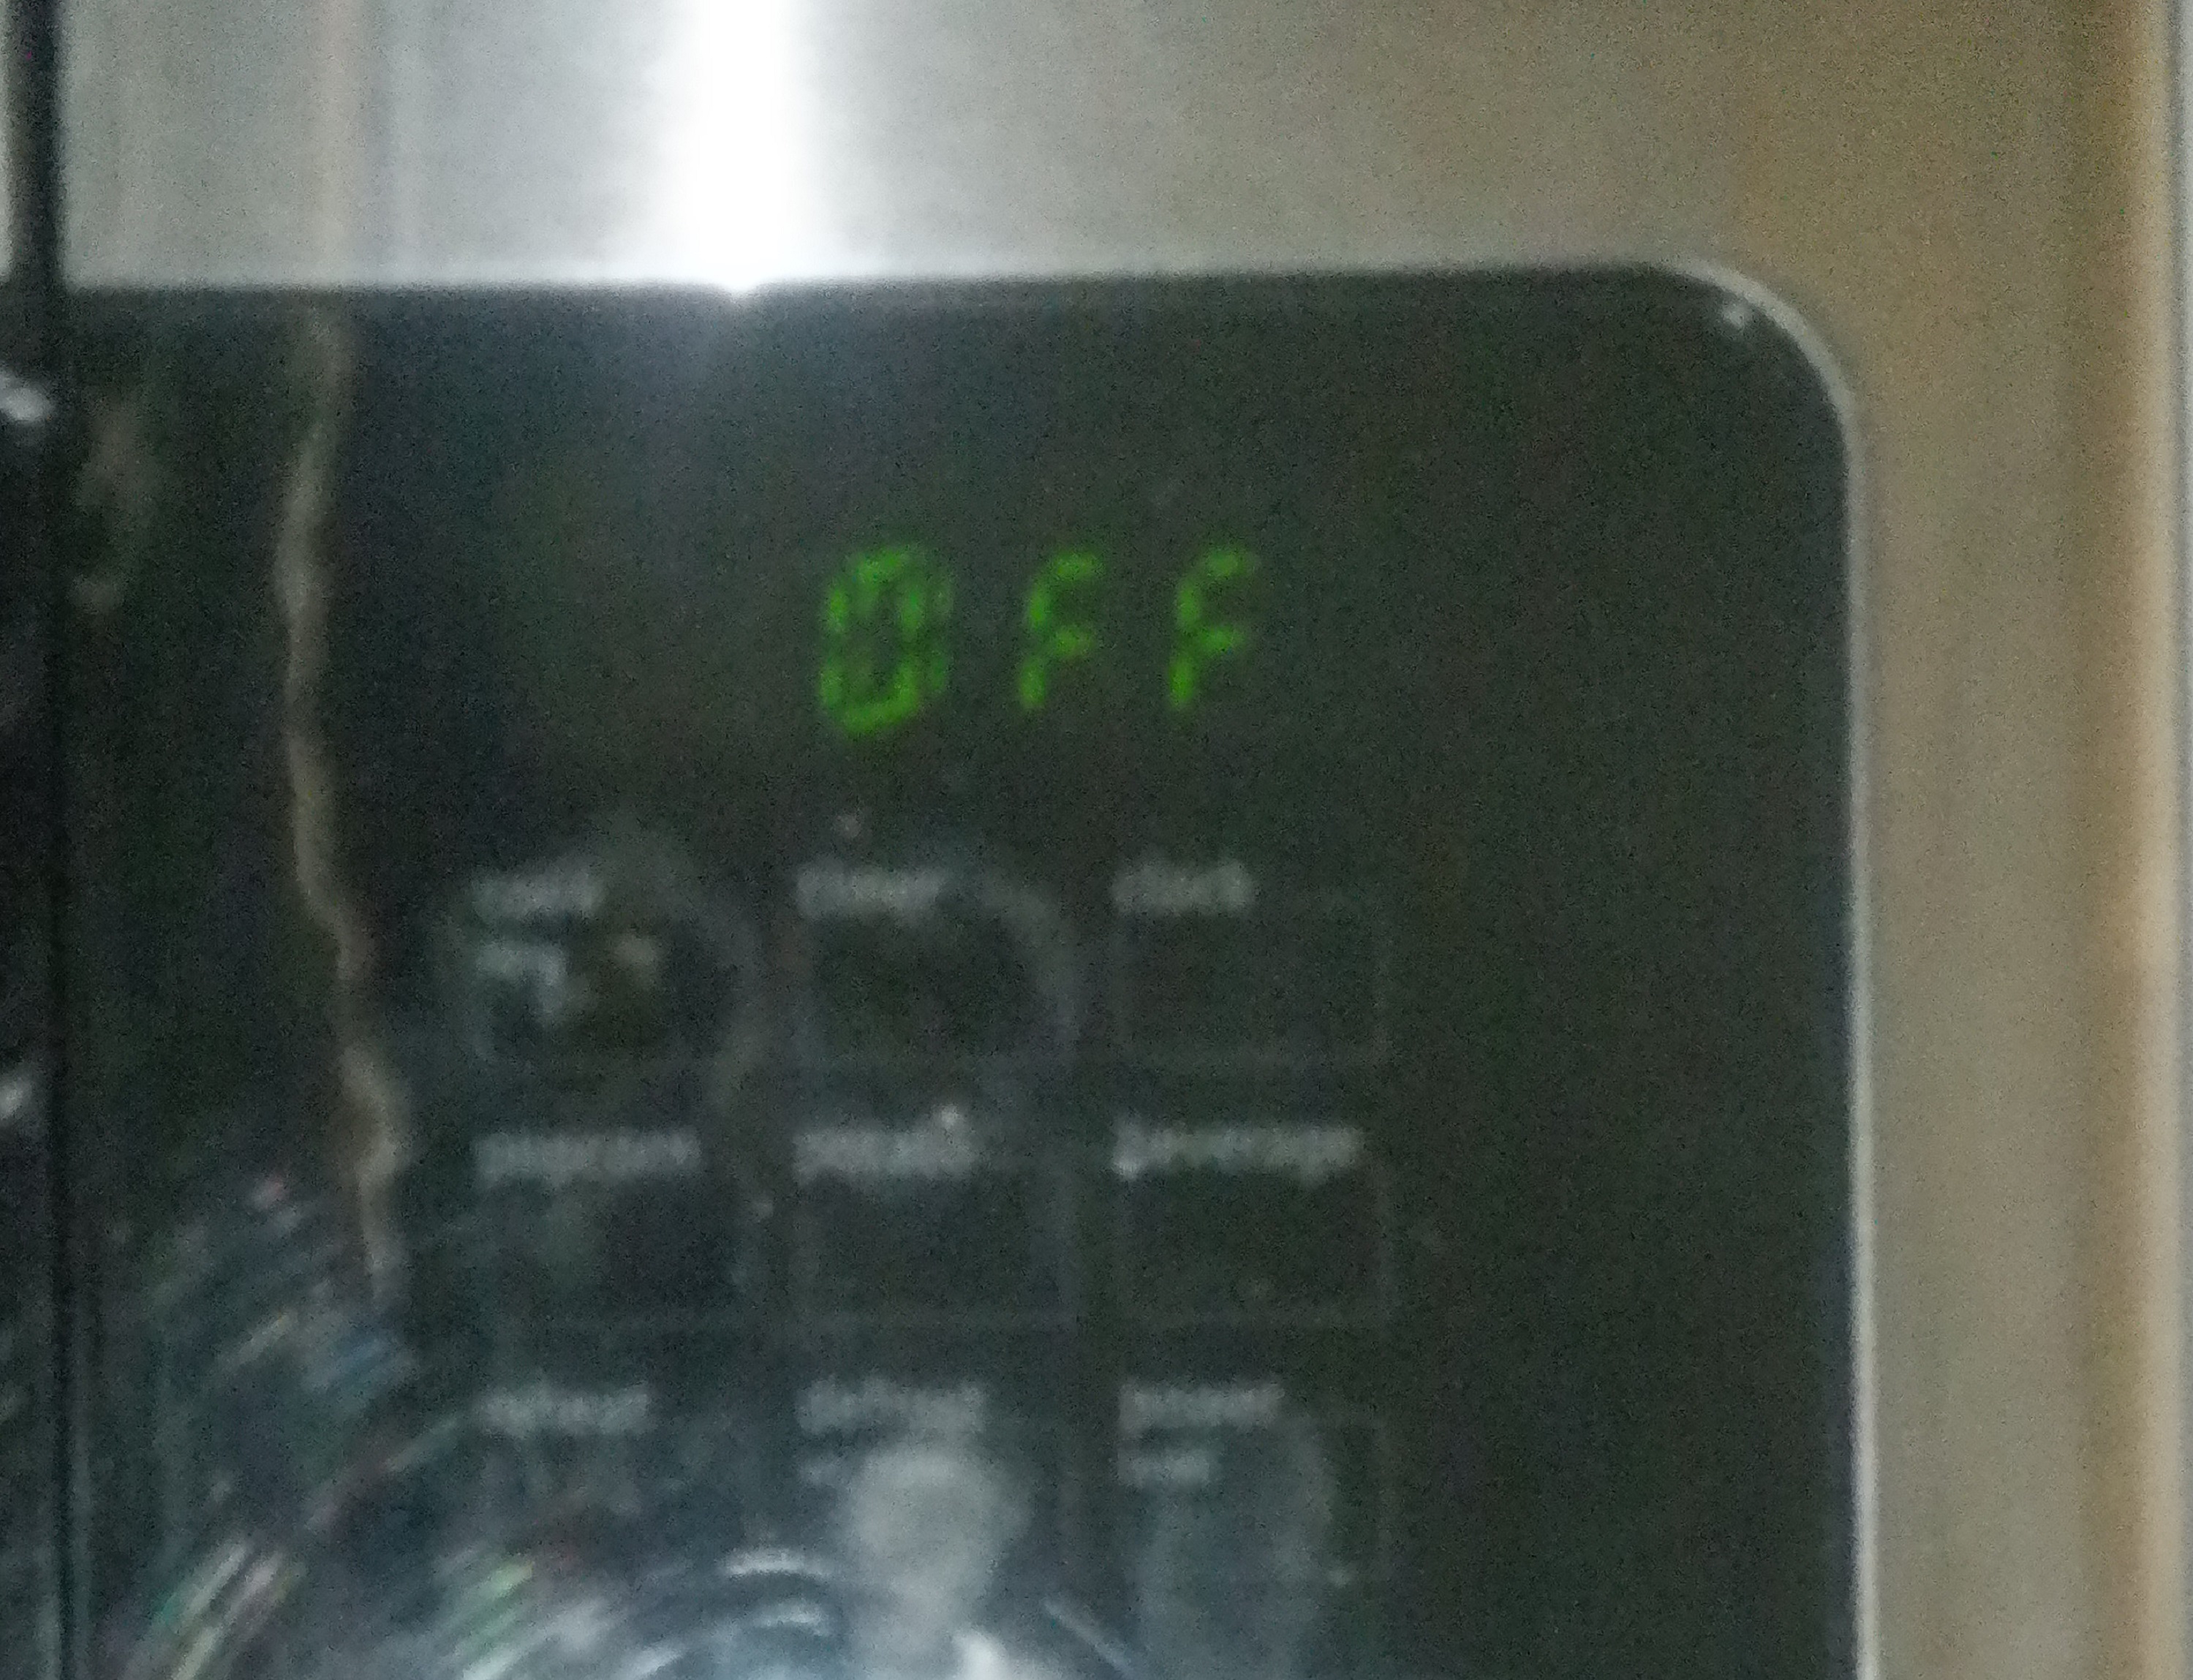 Photo I took of the microwave timer after it went off.